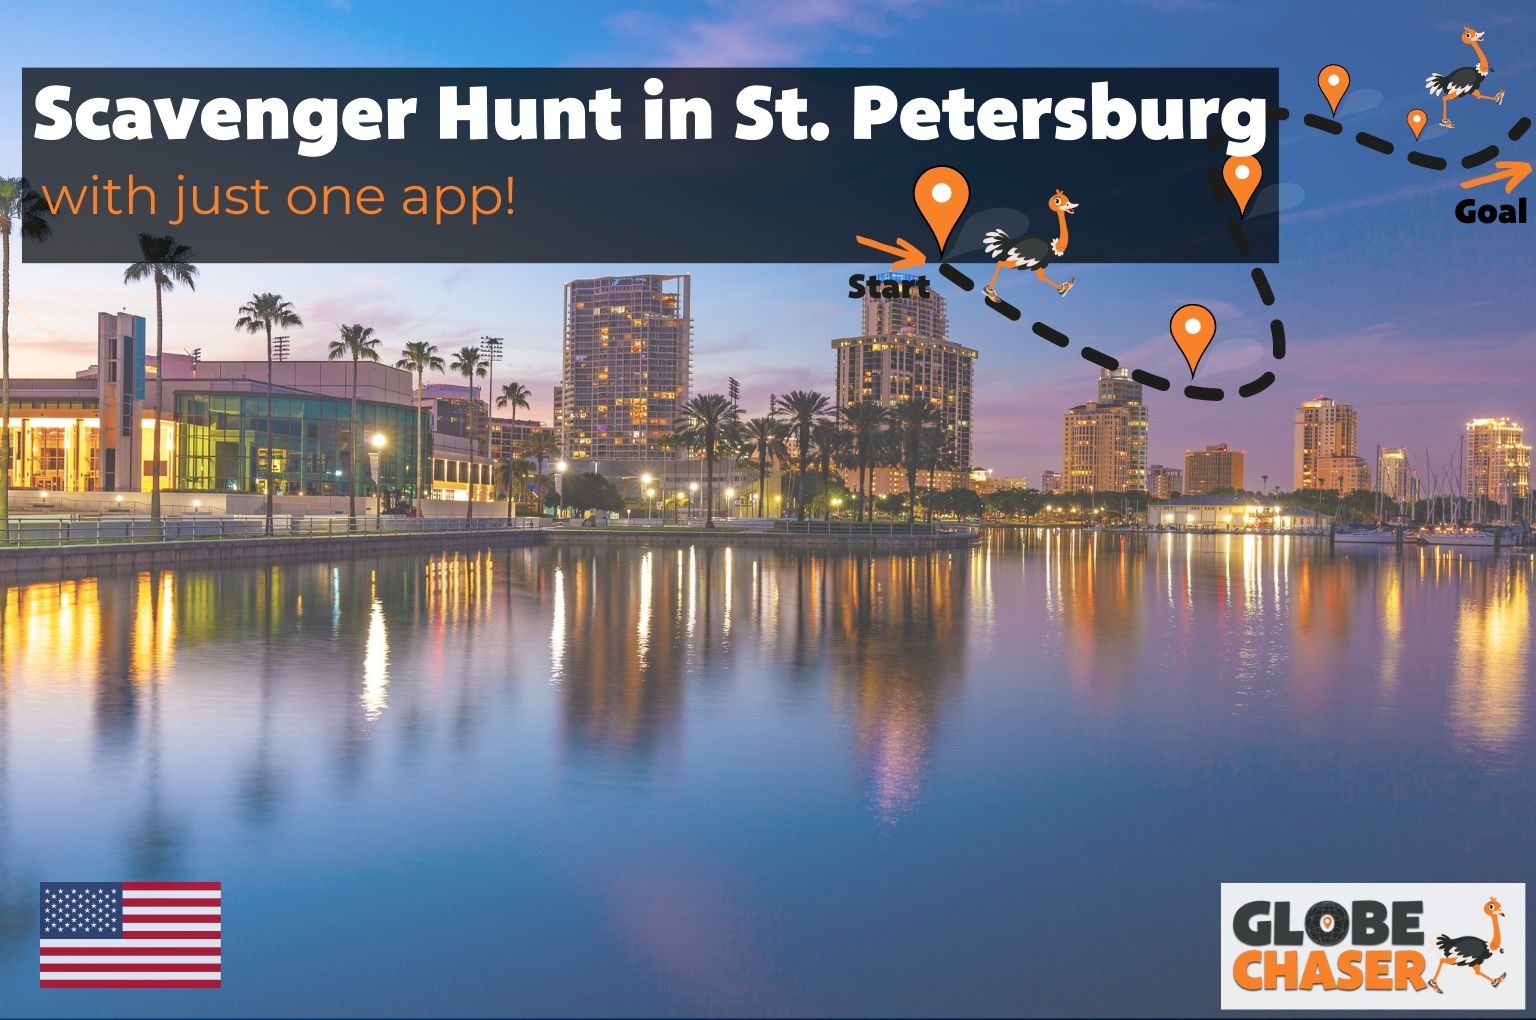 Scavenger Hunt in St. Petersburg, USA - Family Activities with the Globe Chaser App for Outdoor Fun